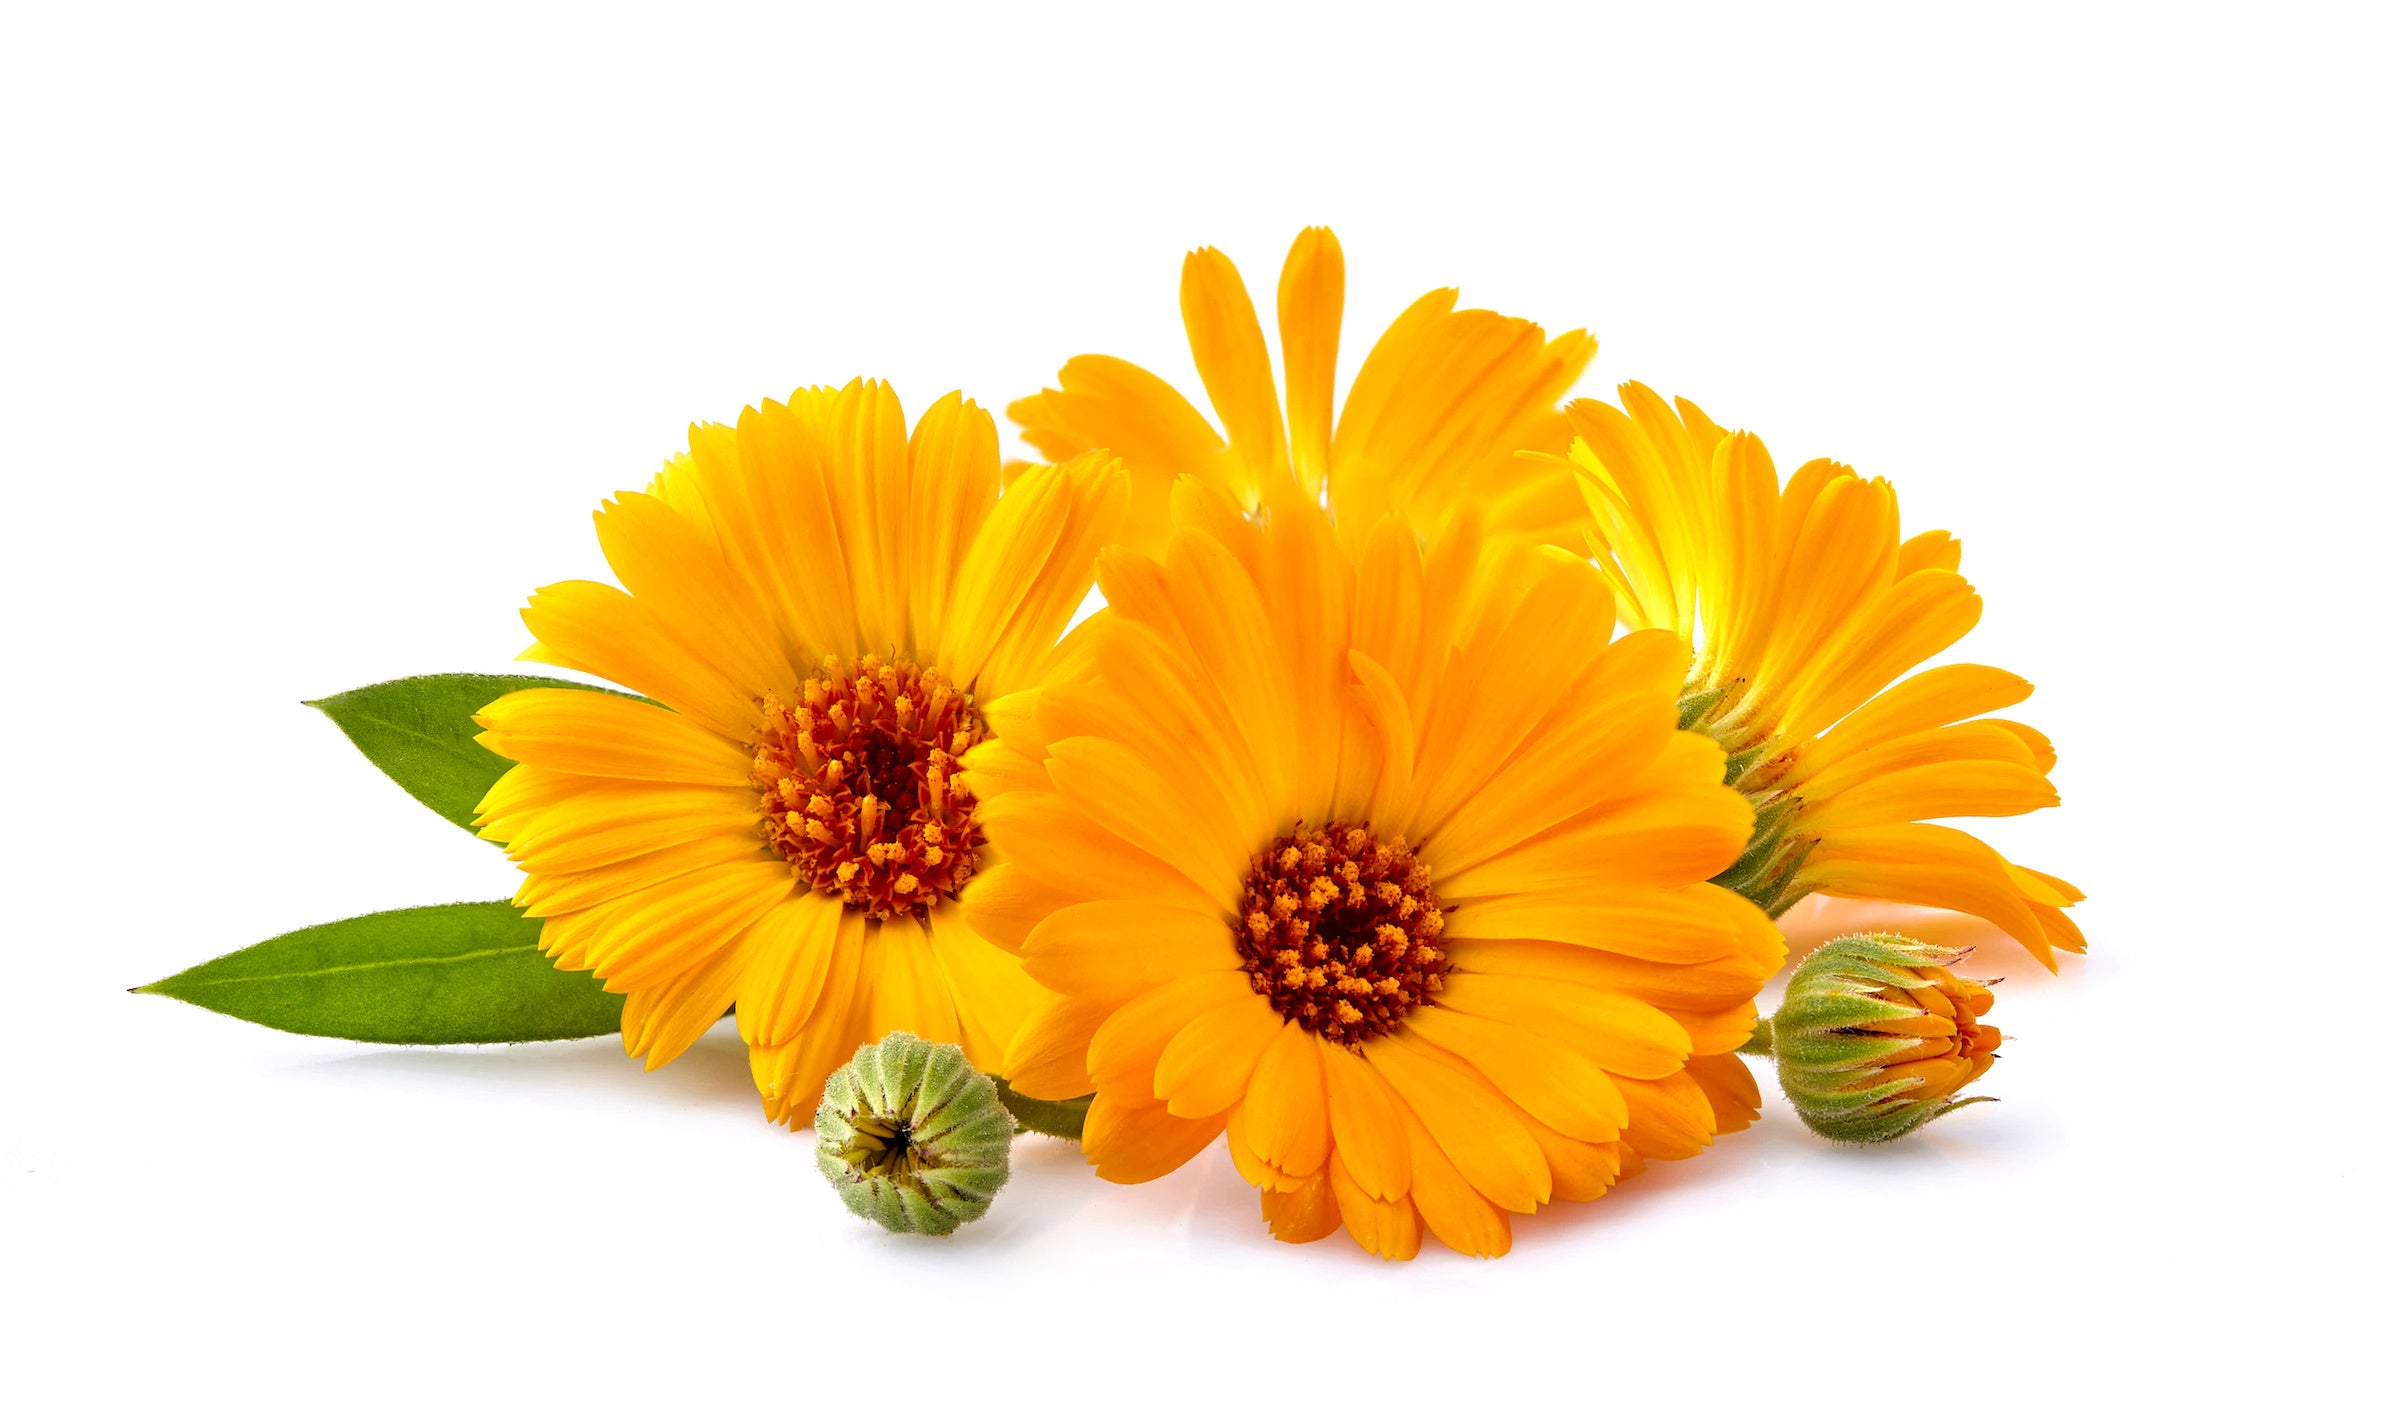 Calendula: The Healing Flower for Skin and Inflammation